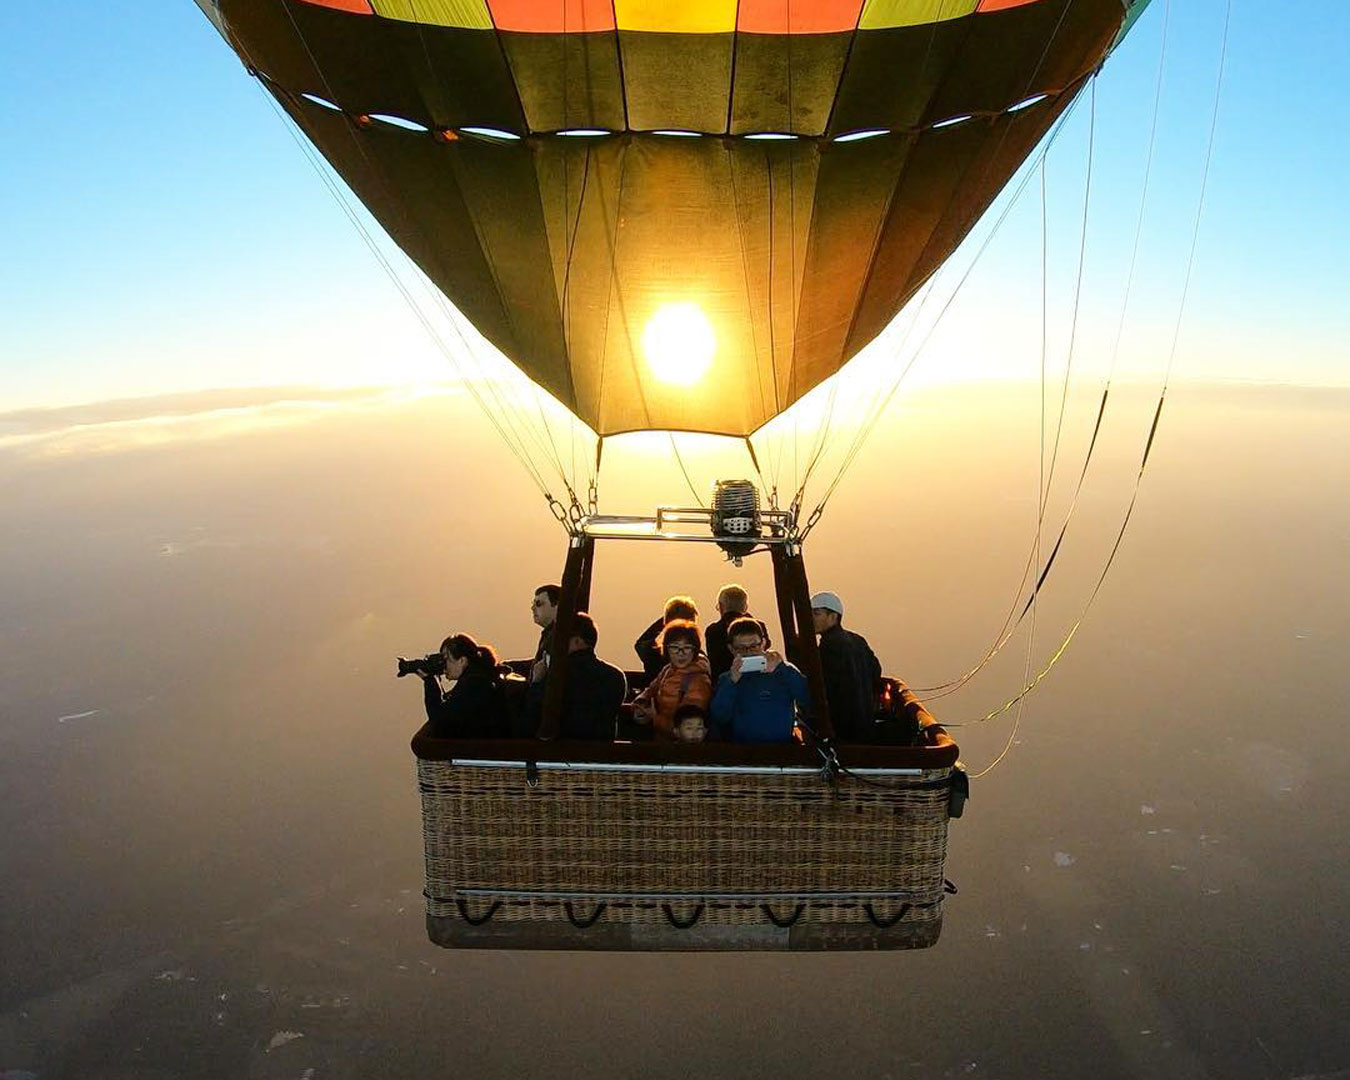 People In Hot Air Balloons